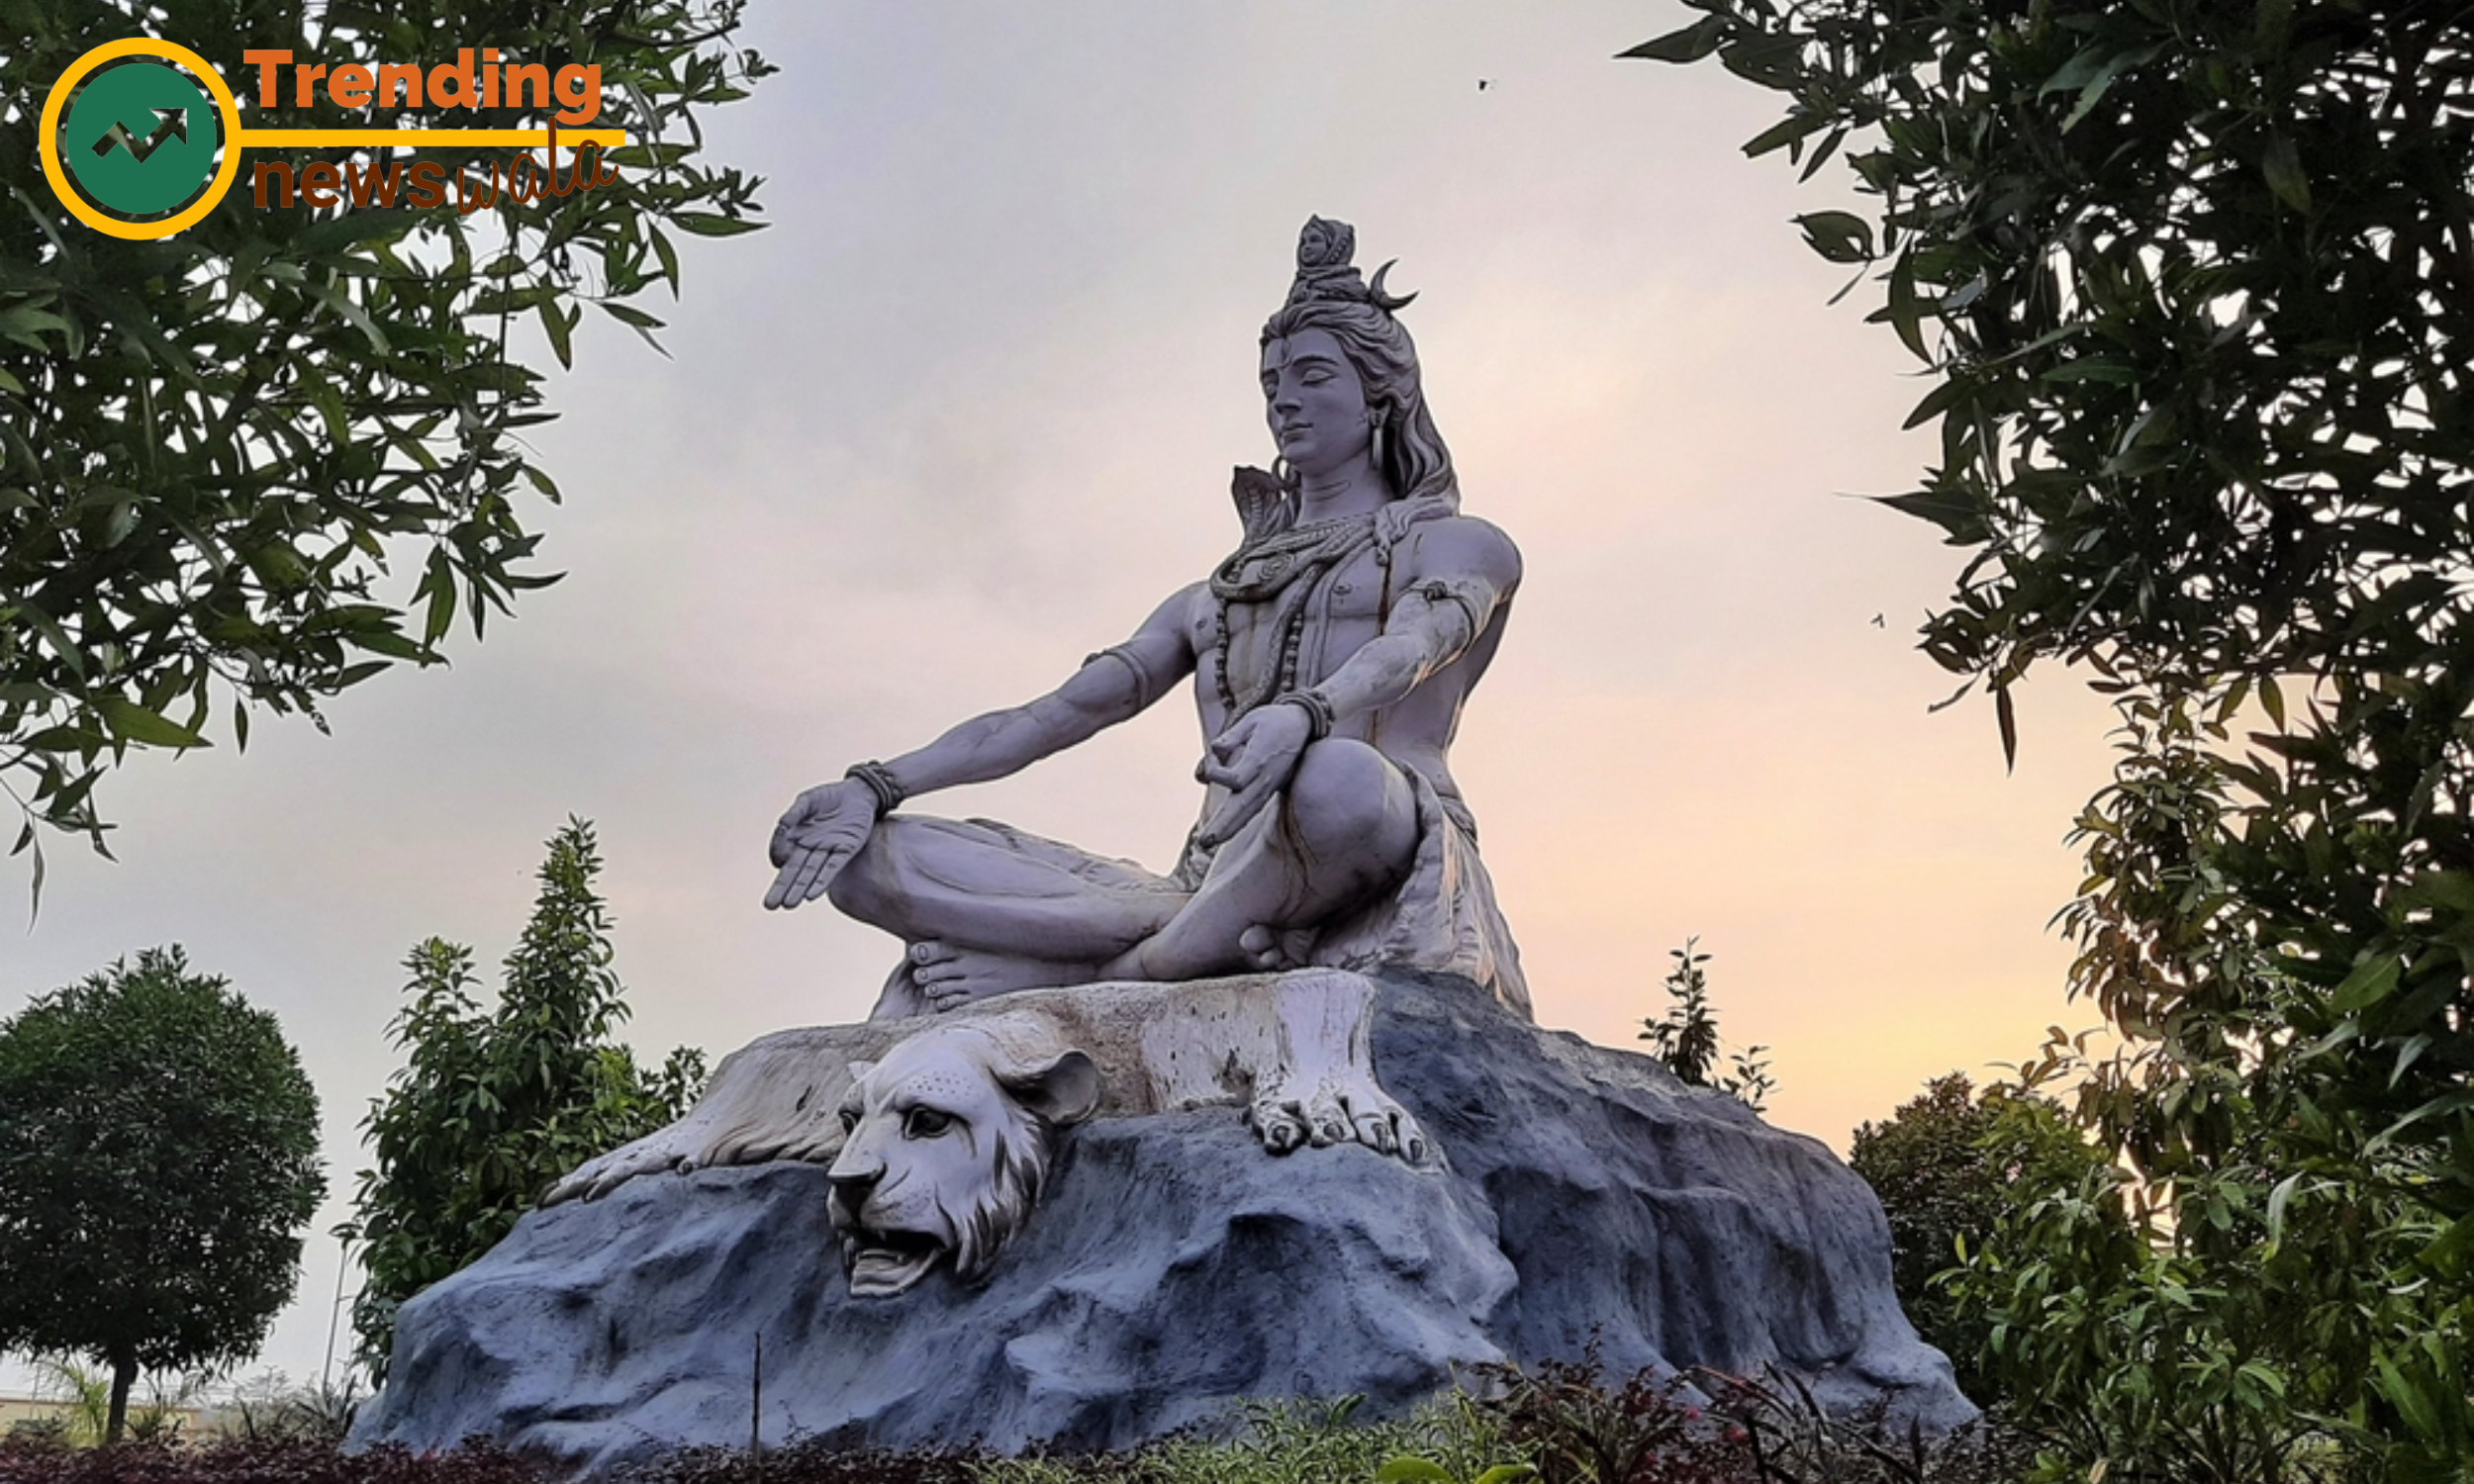 In the Hindu tradition, Shiva is not just a god